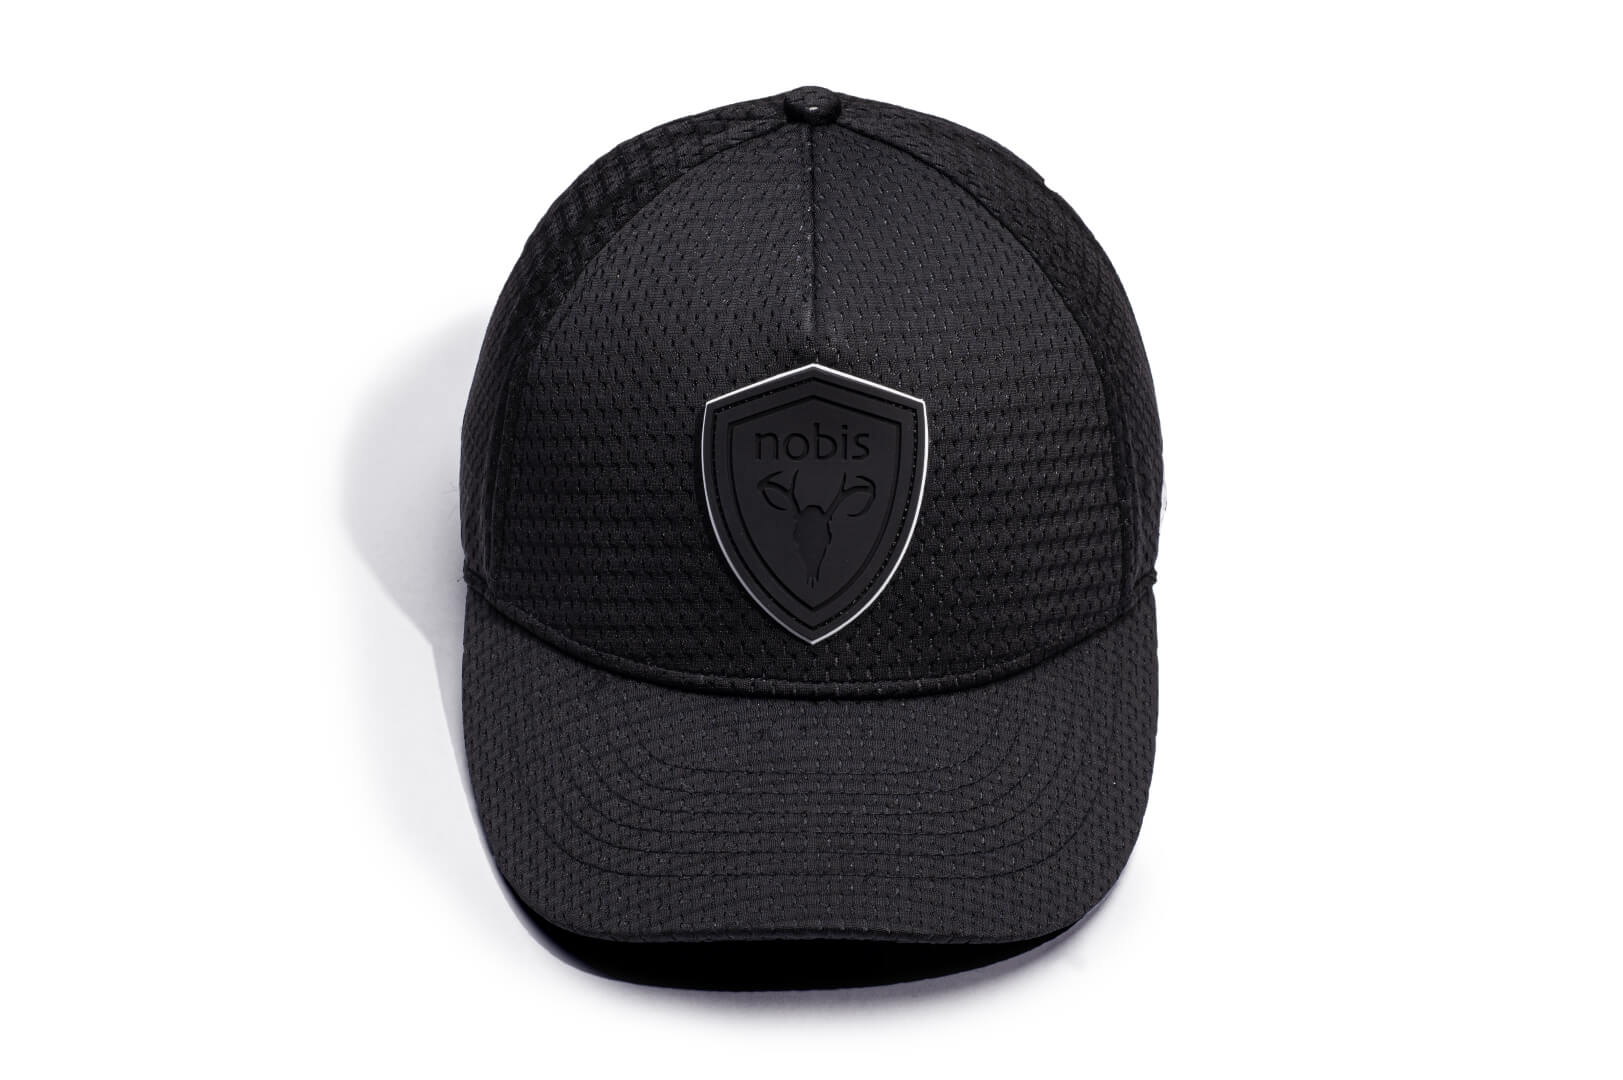 Ciryl Gane x Nobis 5-Panel Adjustable Cap in 5-panel jersey construction, curved brim, adjustable strap at back, tonal black Nobis shield logo attached on crown front, "Bon Gamin" embroidered on the left, and flag of France embroidered on the back, in Black